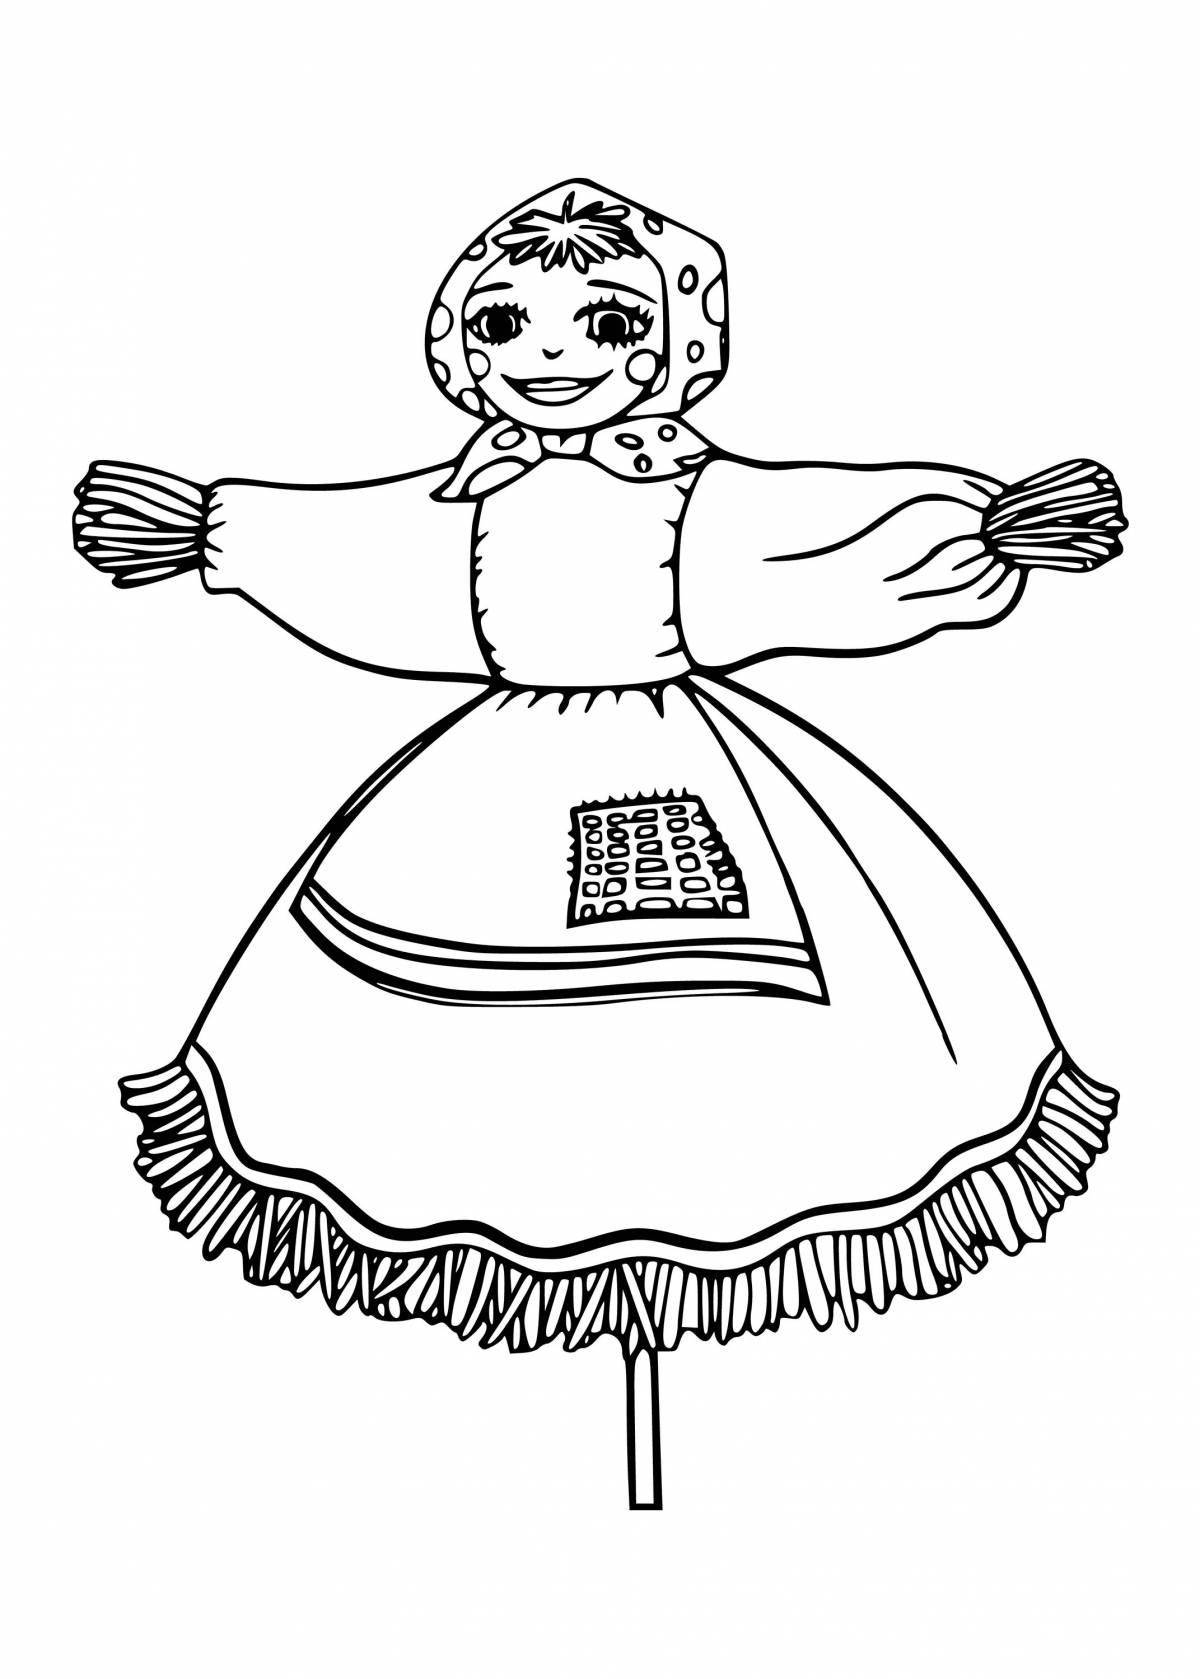 Christmas carnival coloring page for grade 2